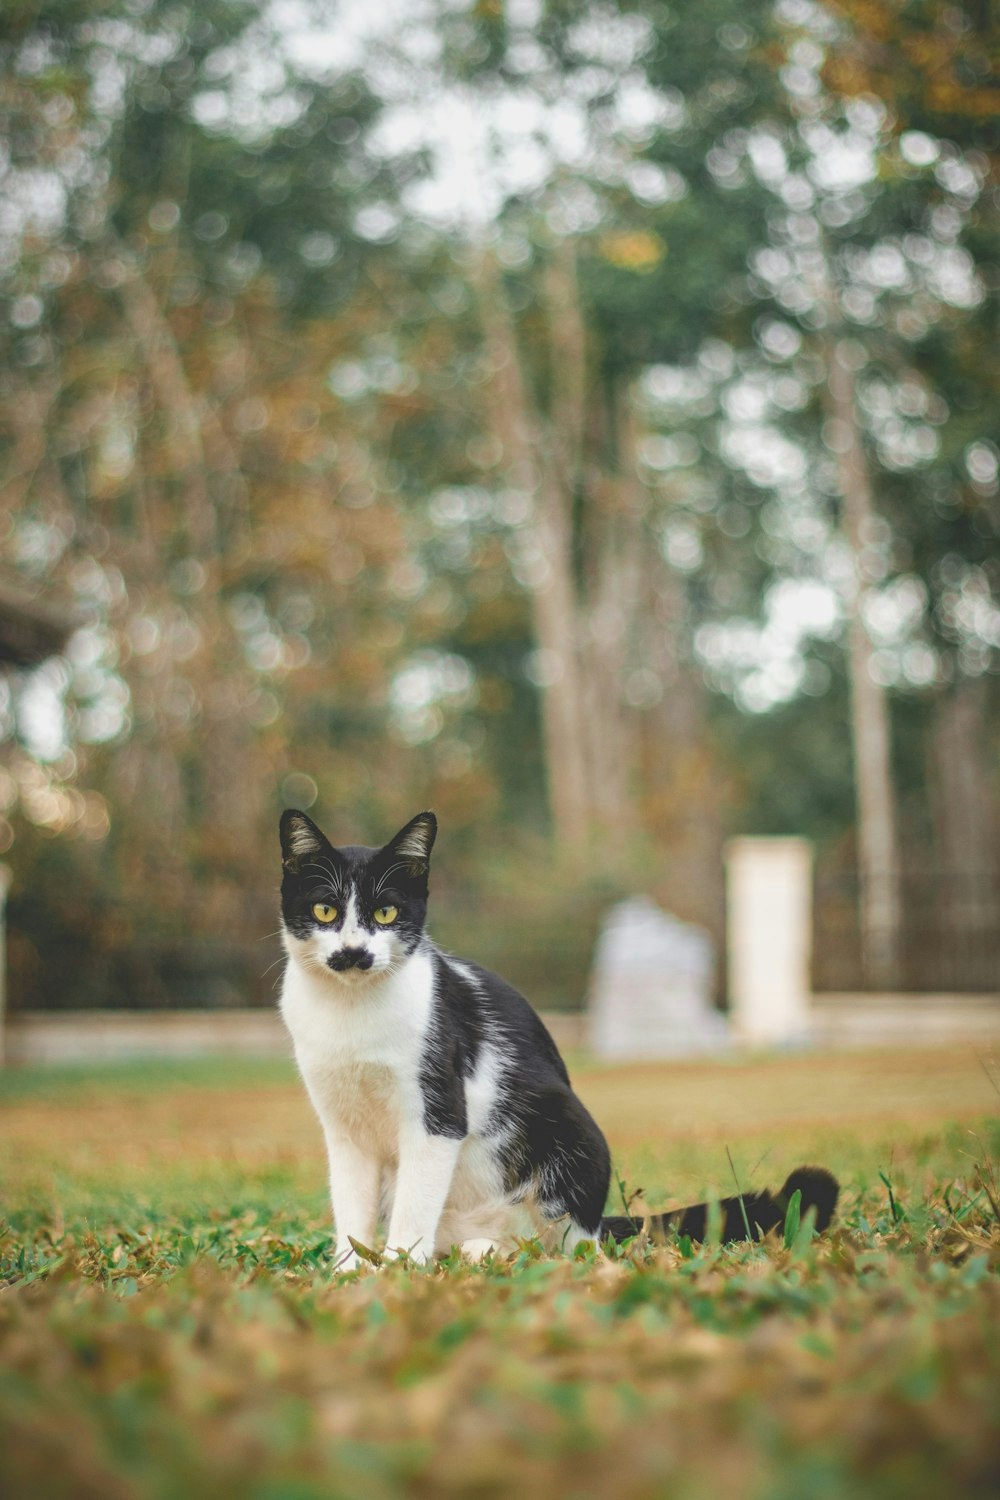 black and white cat on green grass field during daytime